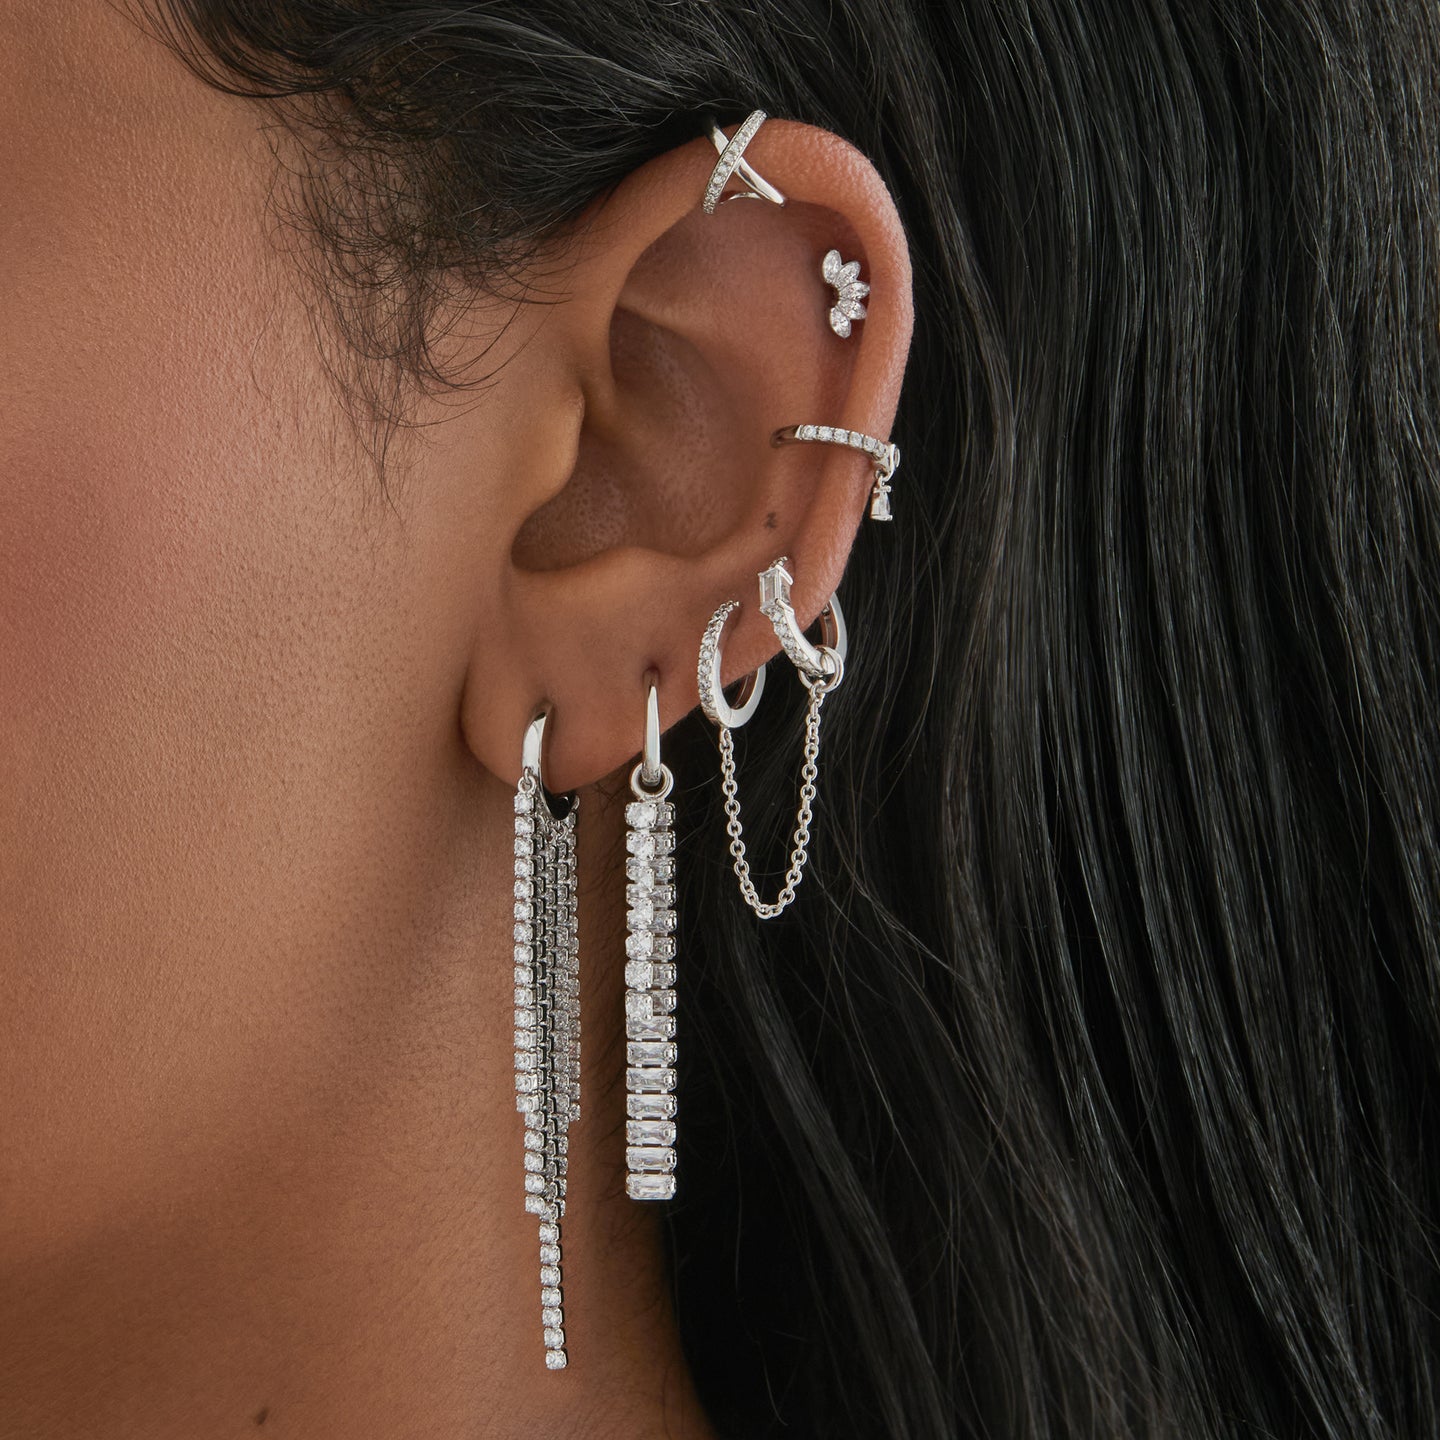 This is an image of a silver huggie that has silver/clear CZ strands dangling from it in a fringed pattern on ear. [hover] color:null|silver/clear